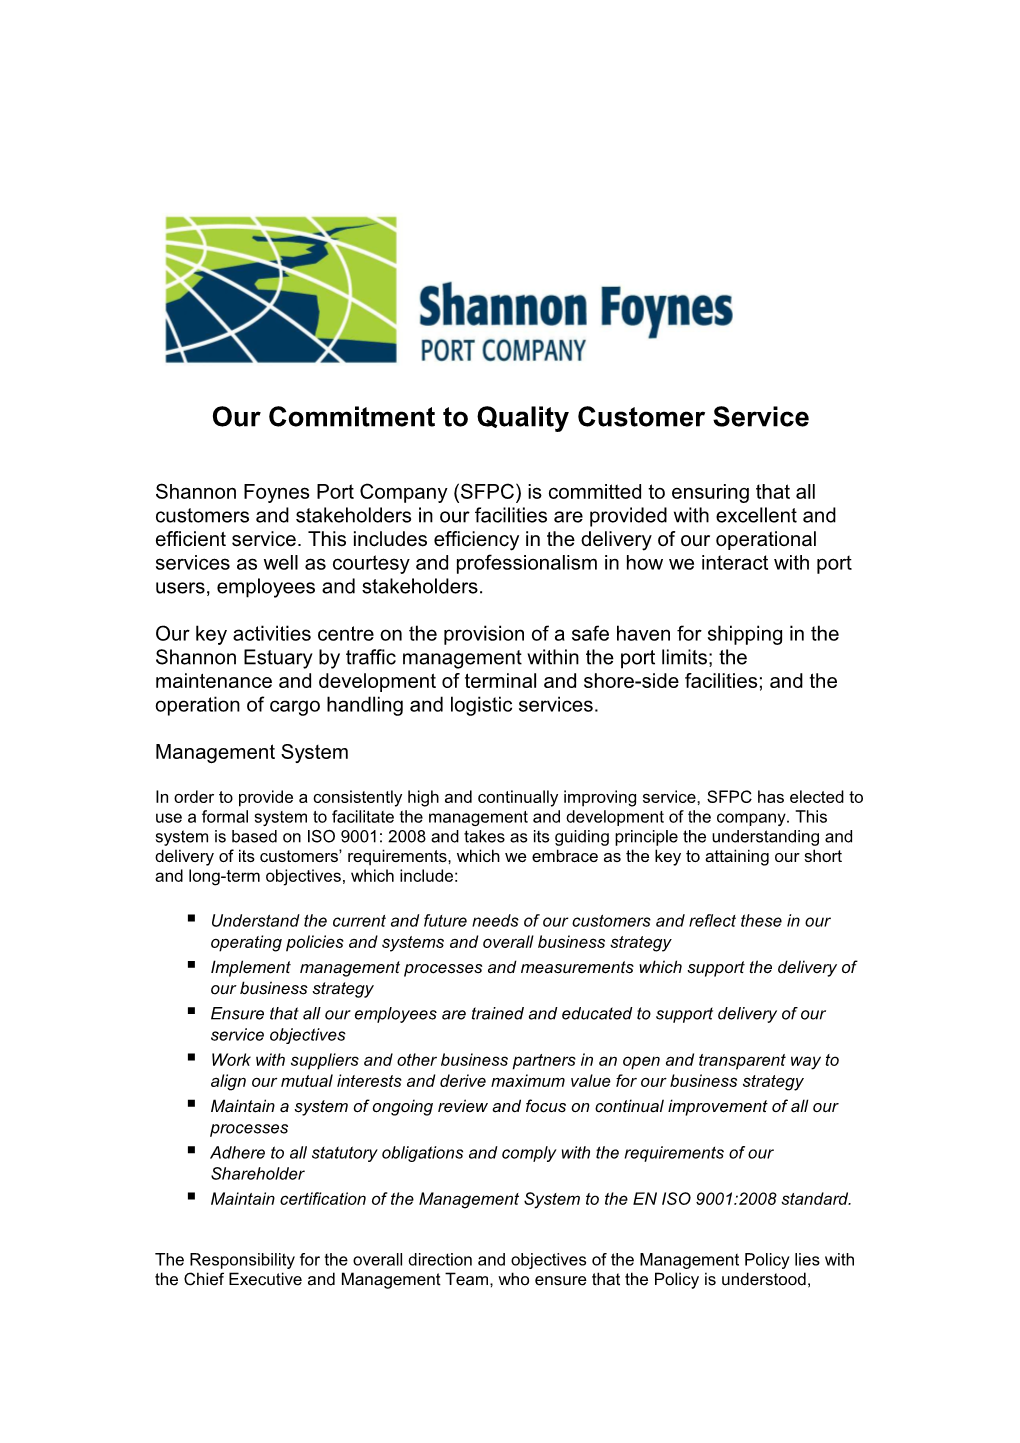 Our Commitment to Quality Customer Service